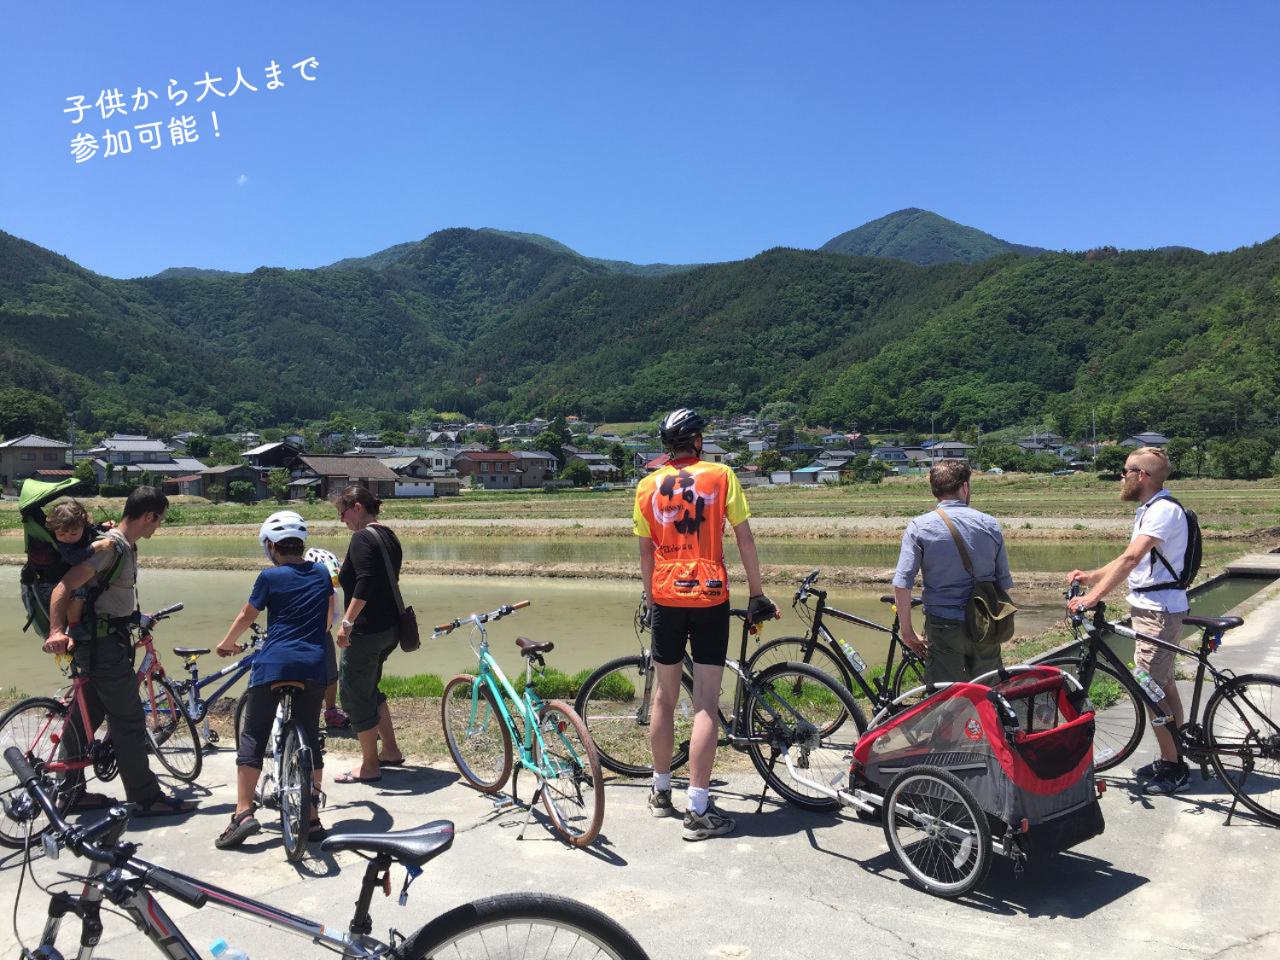 Onsen Town Cycling Tour  (small groups of five persons or more)